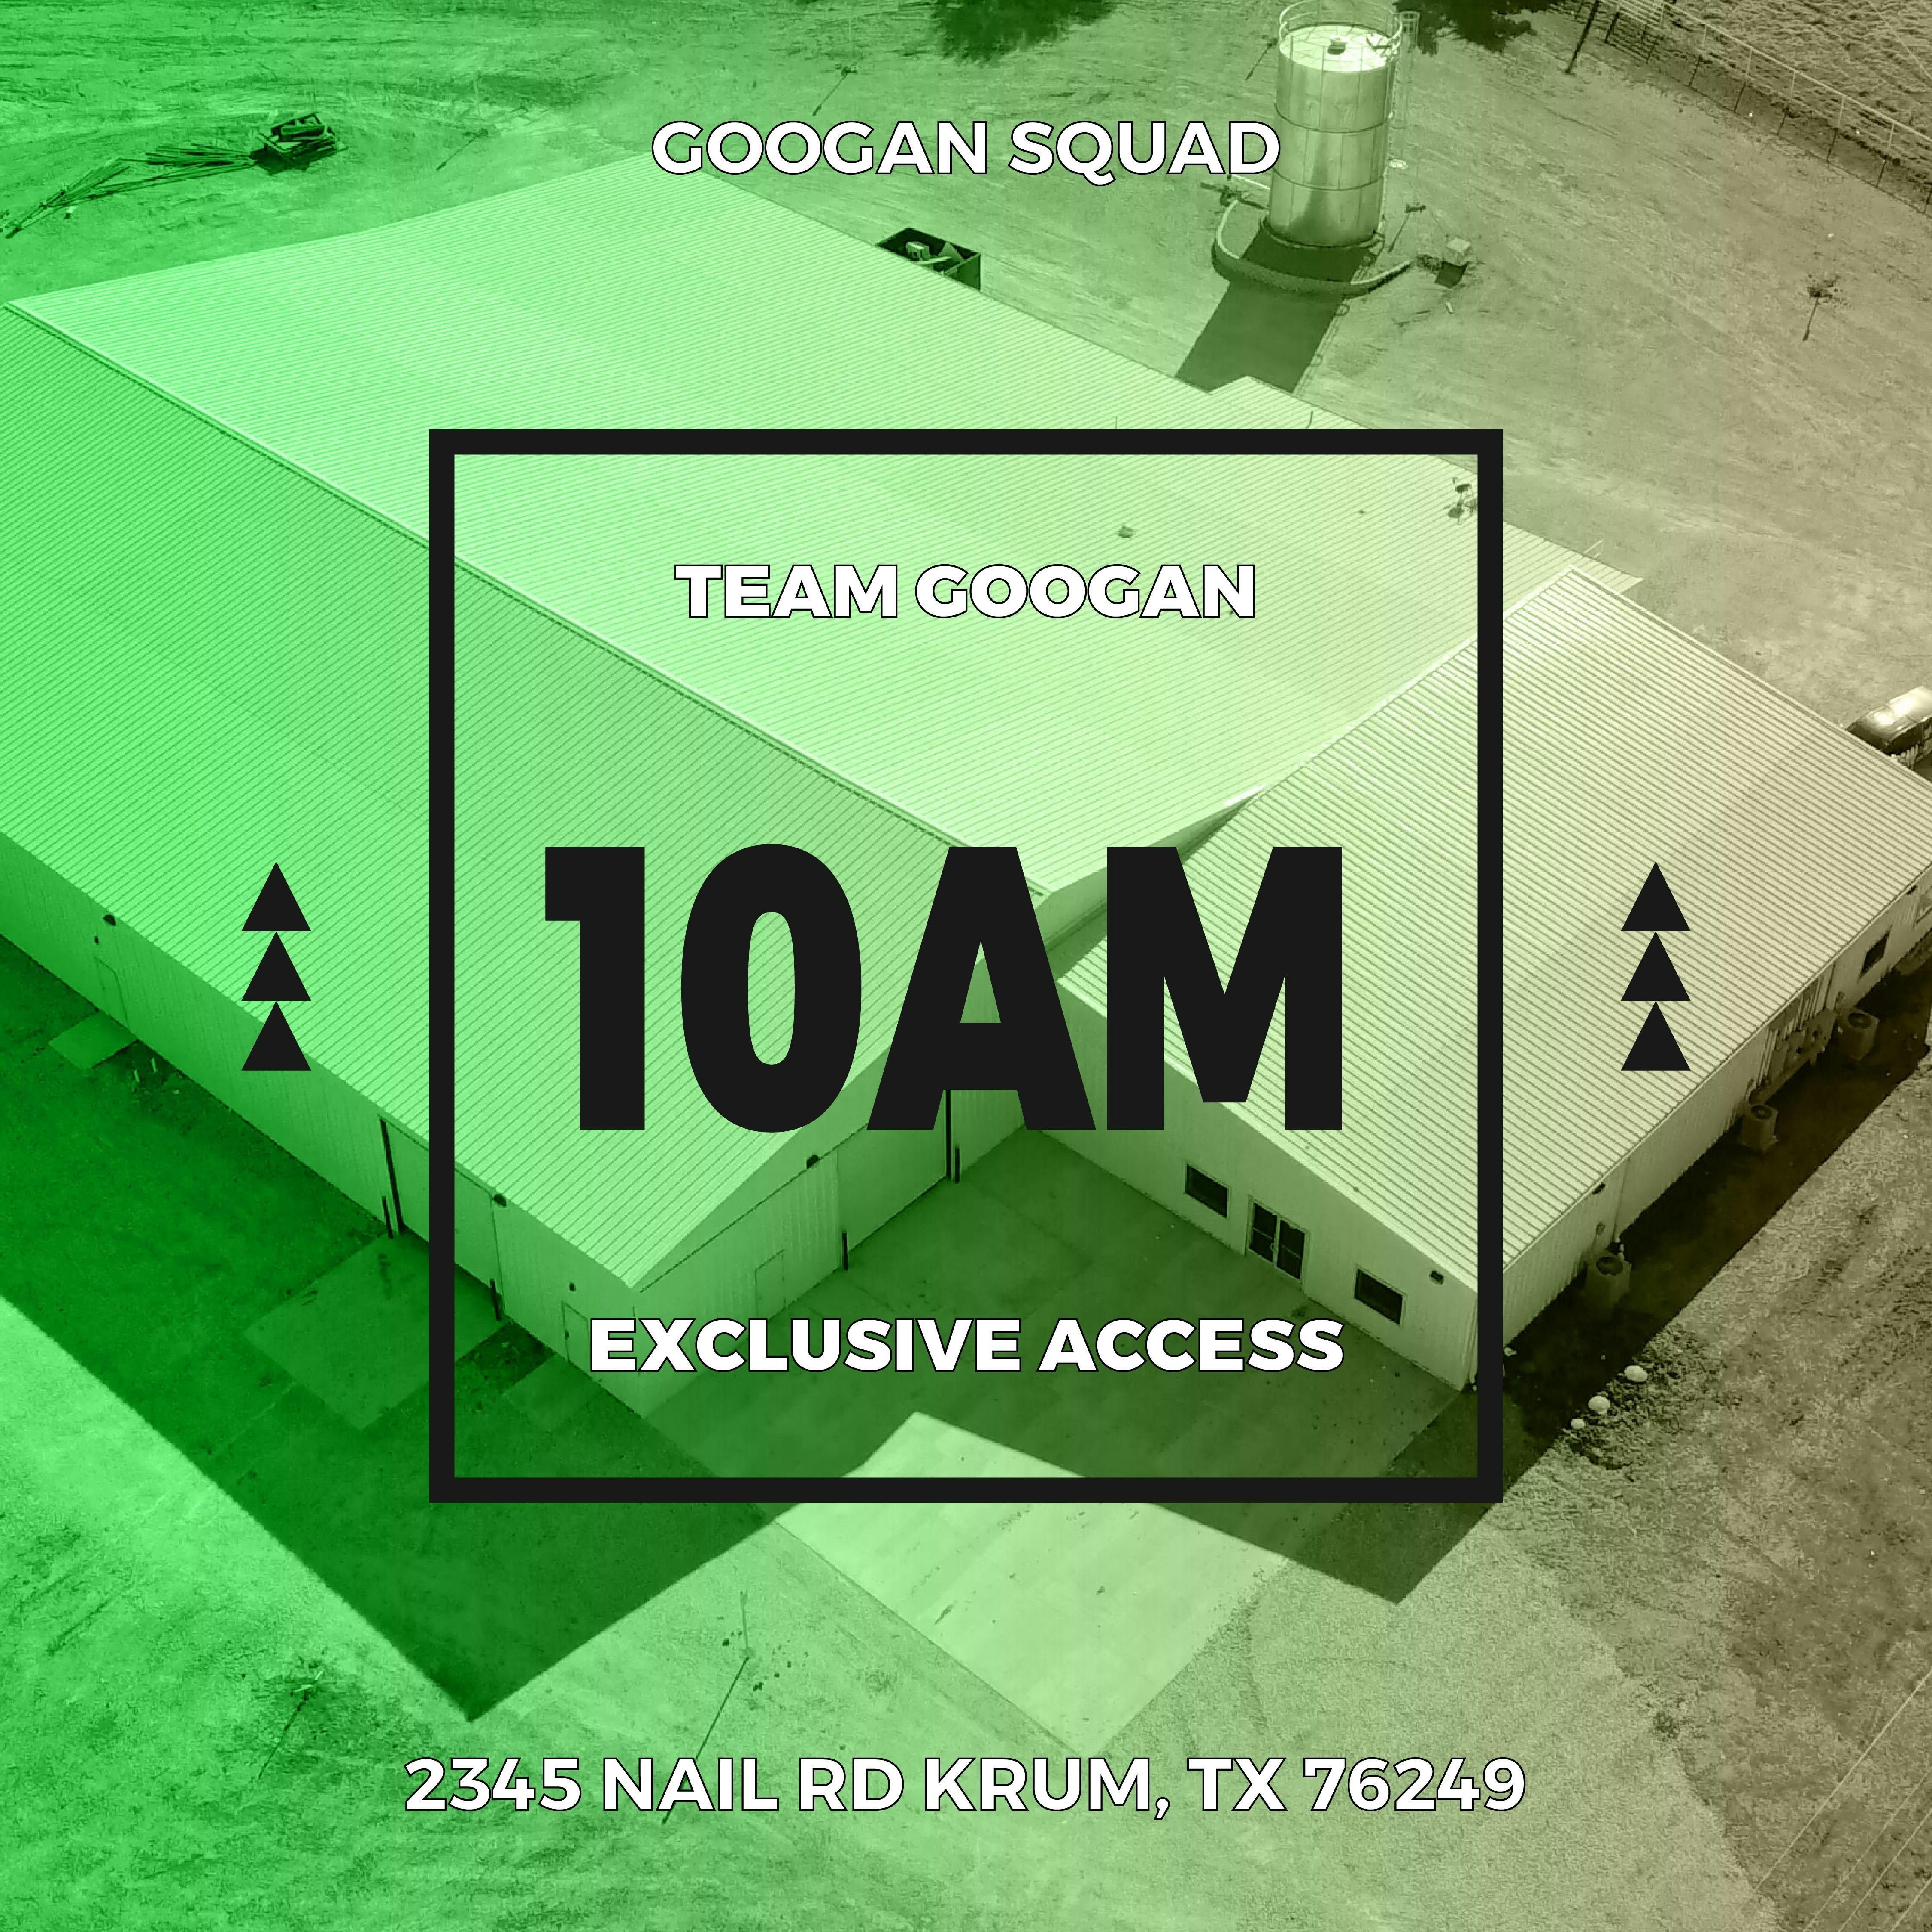 Early Access to Googan HQ Grand Opening